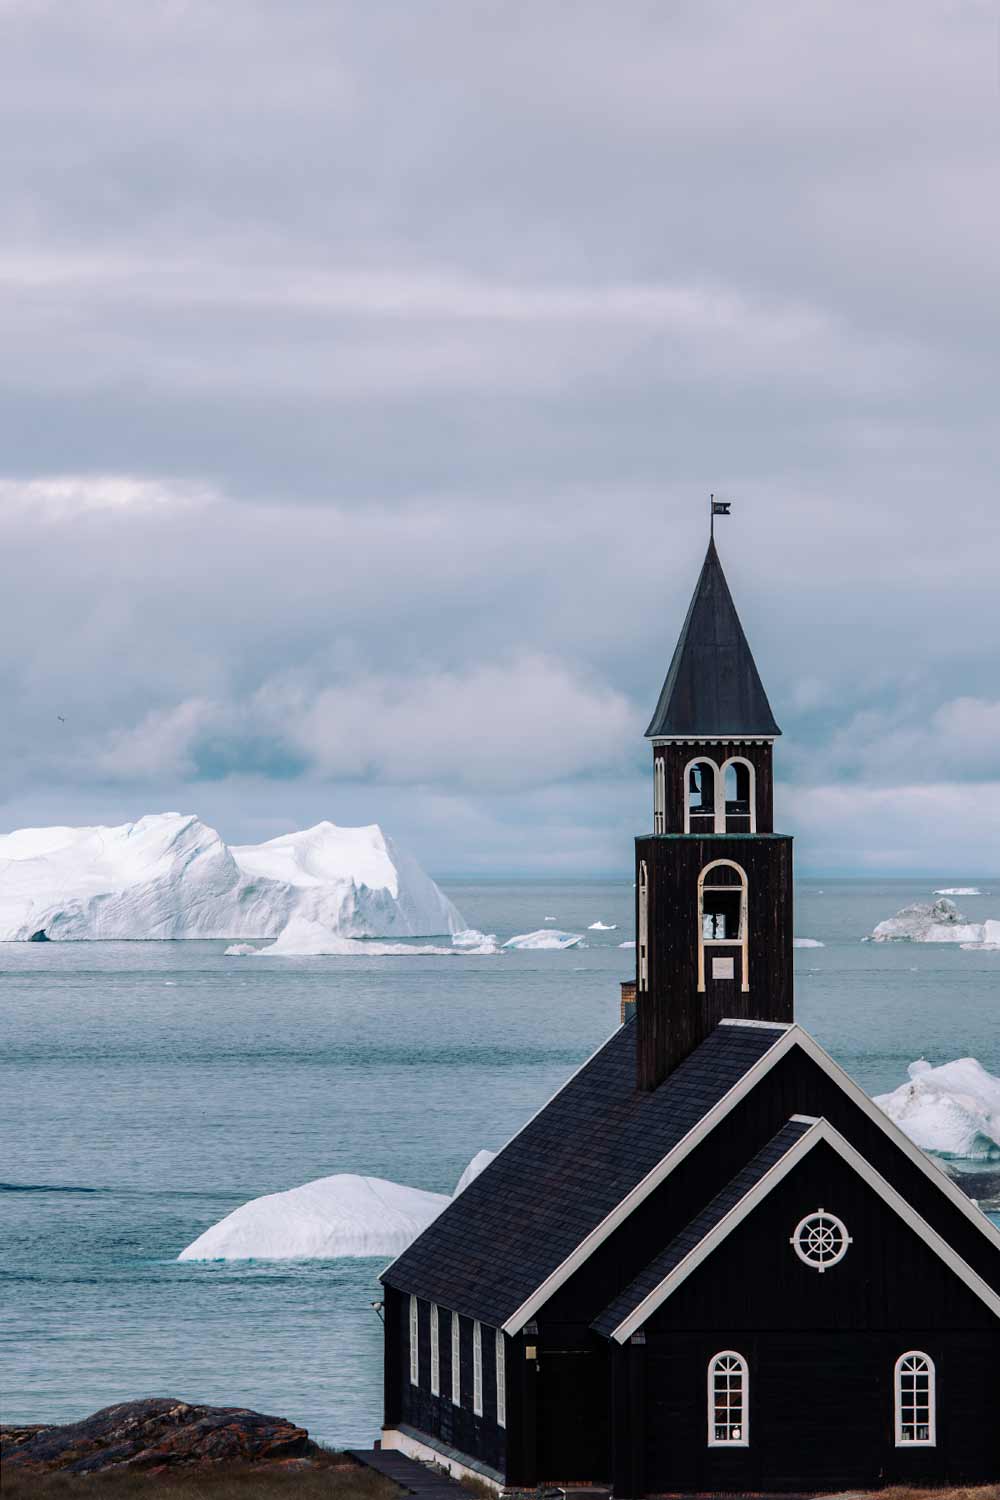 Discovering Ilulissat: Town vistas during a 10-day journey in Greenland